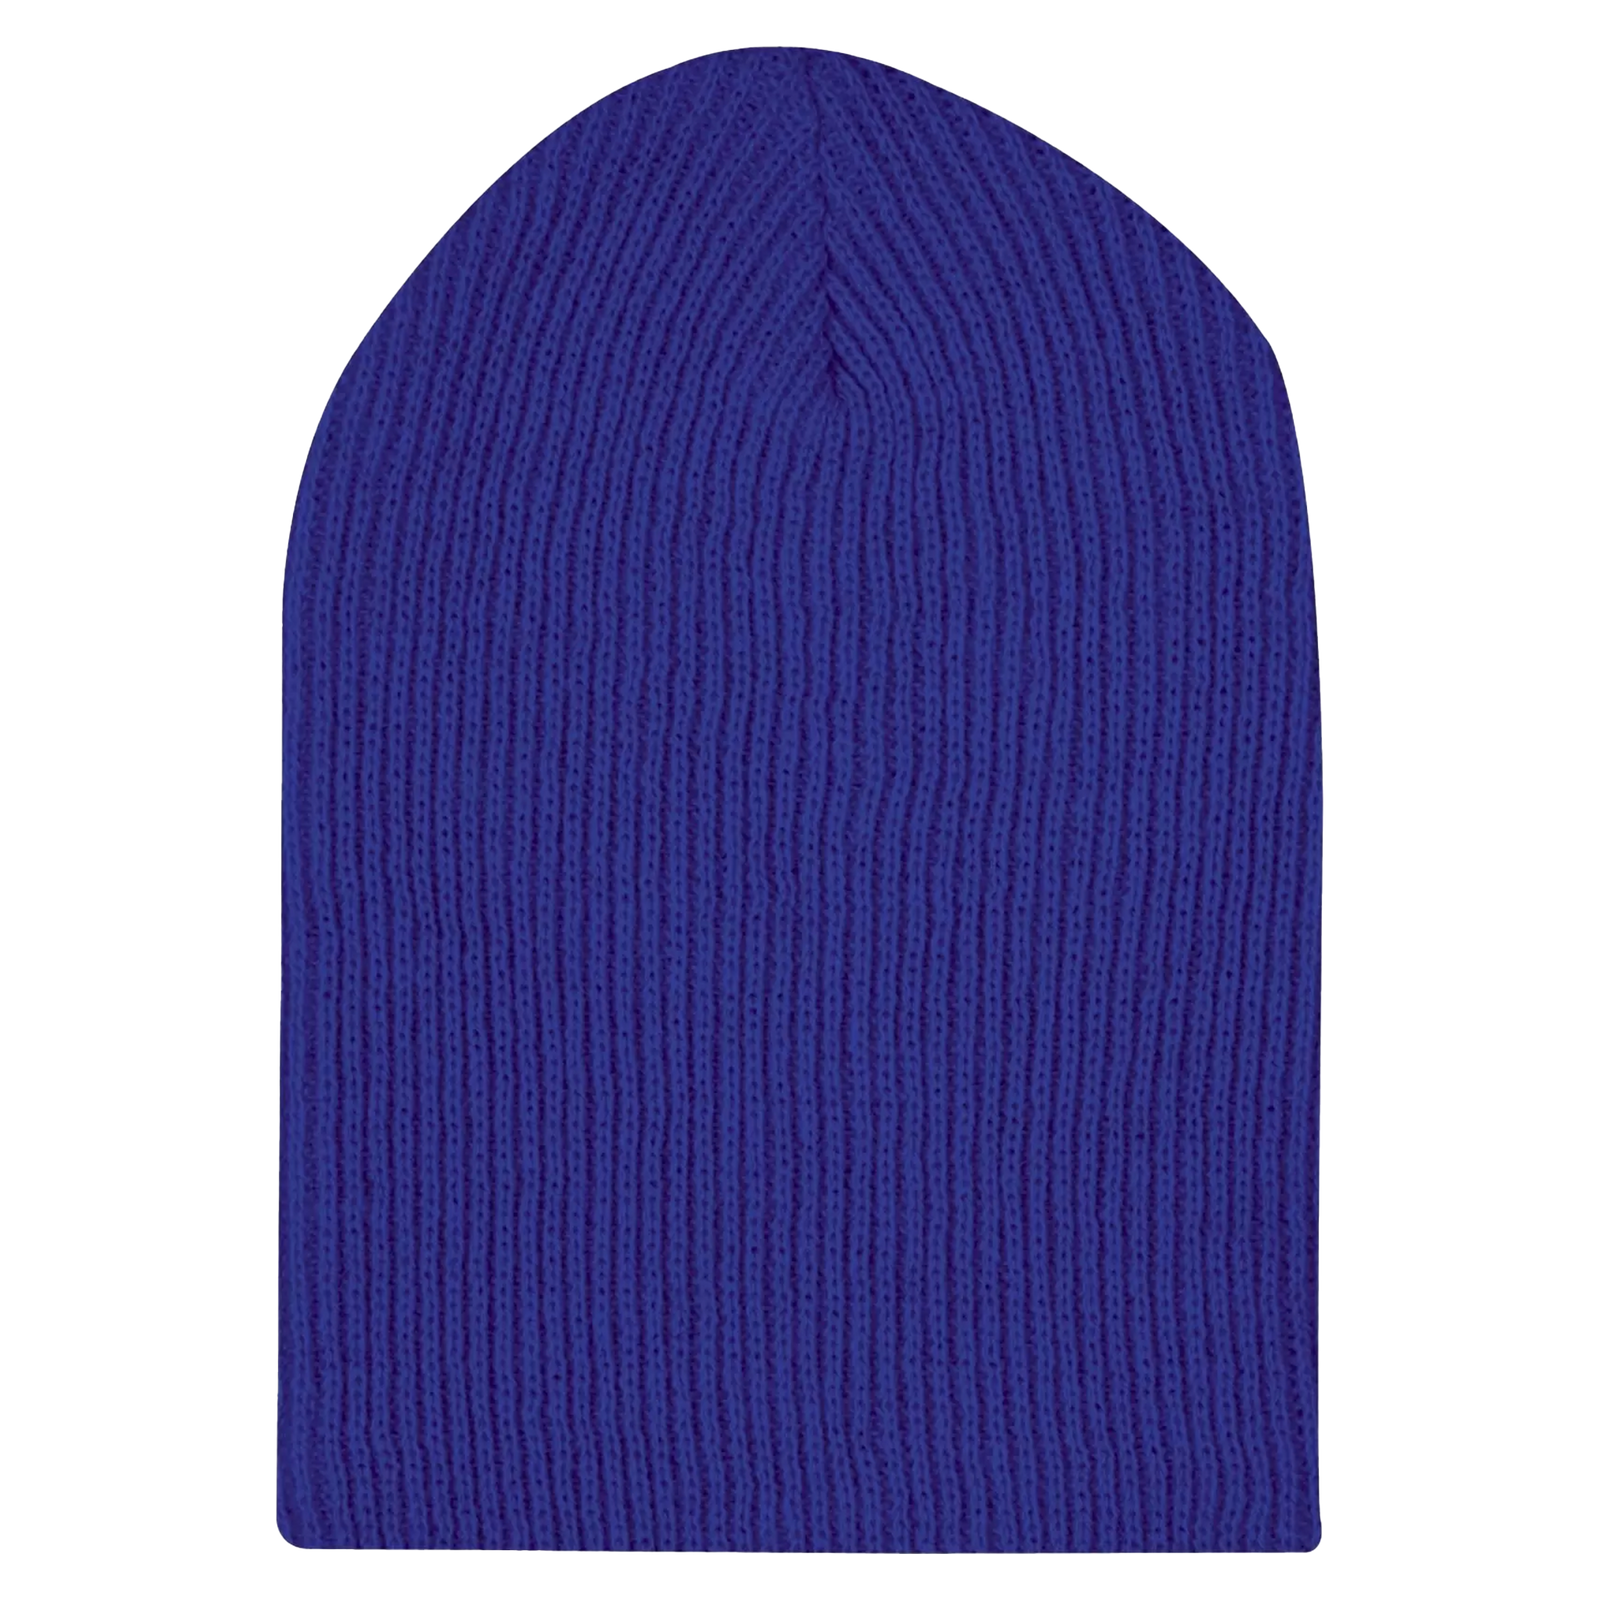 ATC Everyday Rib Knit Slouch Beanie - Adult Unisex One Size Fits All - Royal